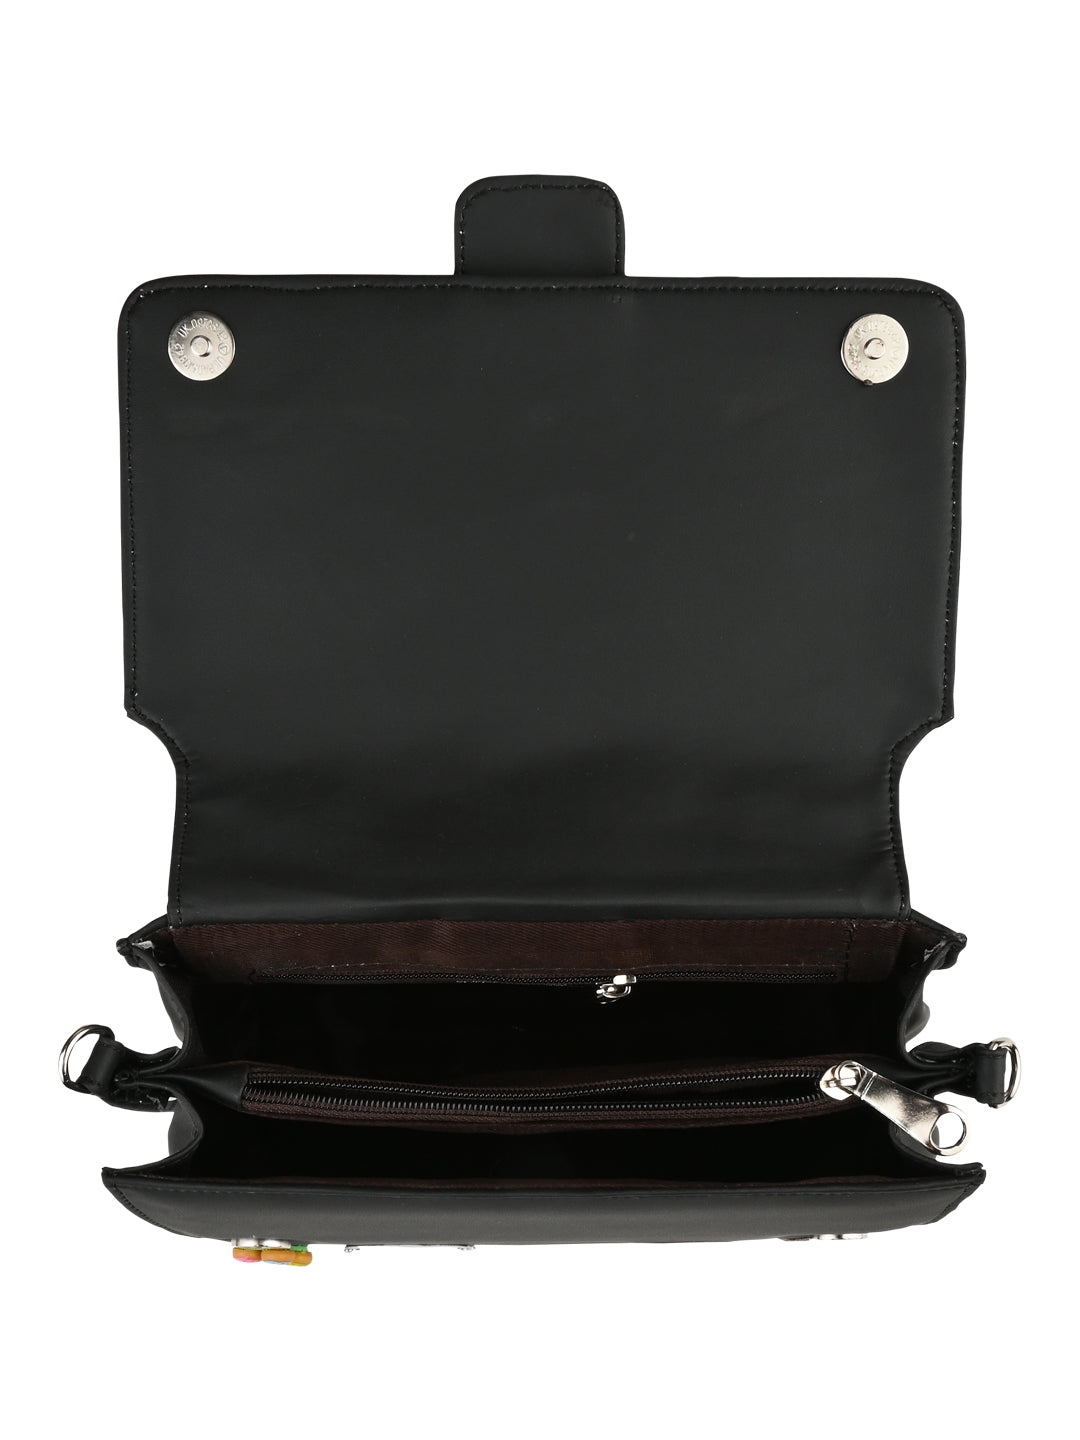 A Vdesi Black pop badges belt sling bag made of PU material with two compartments and a zipper.